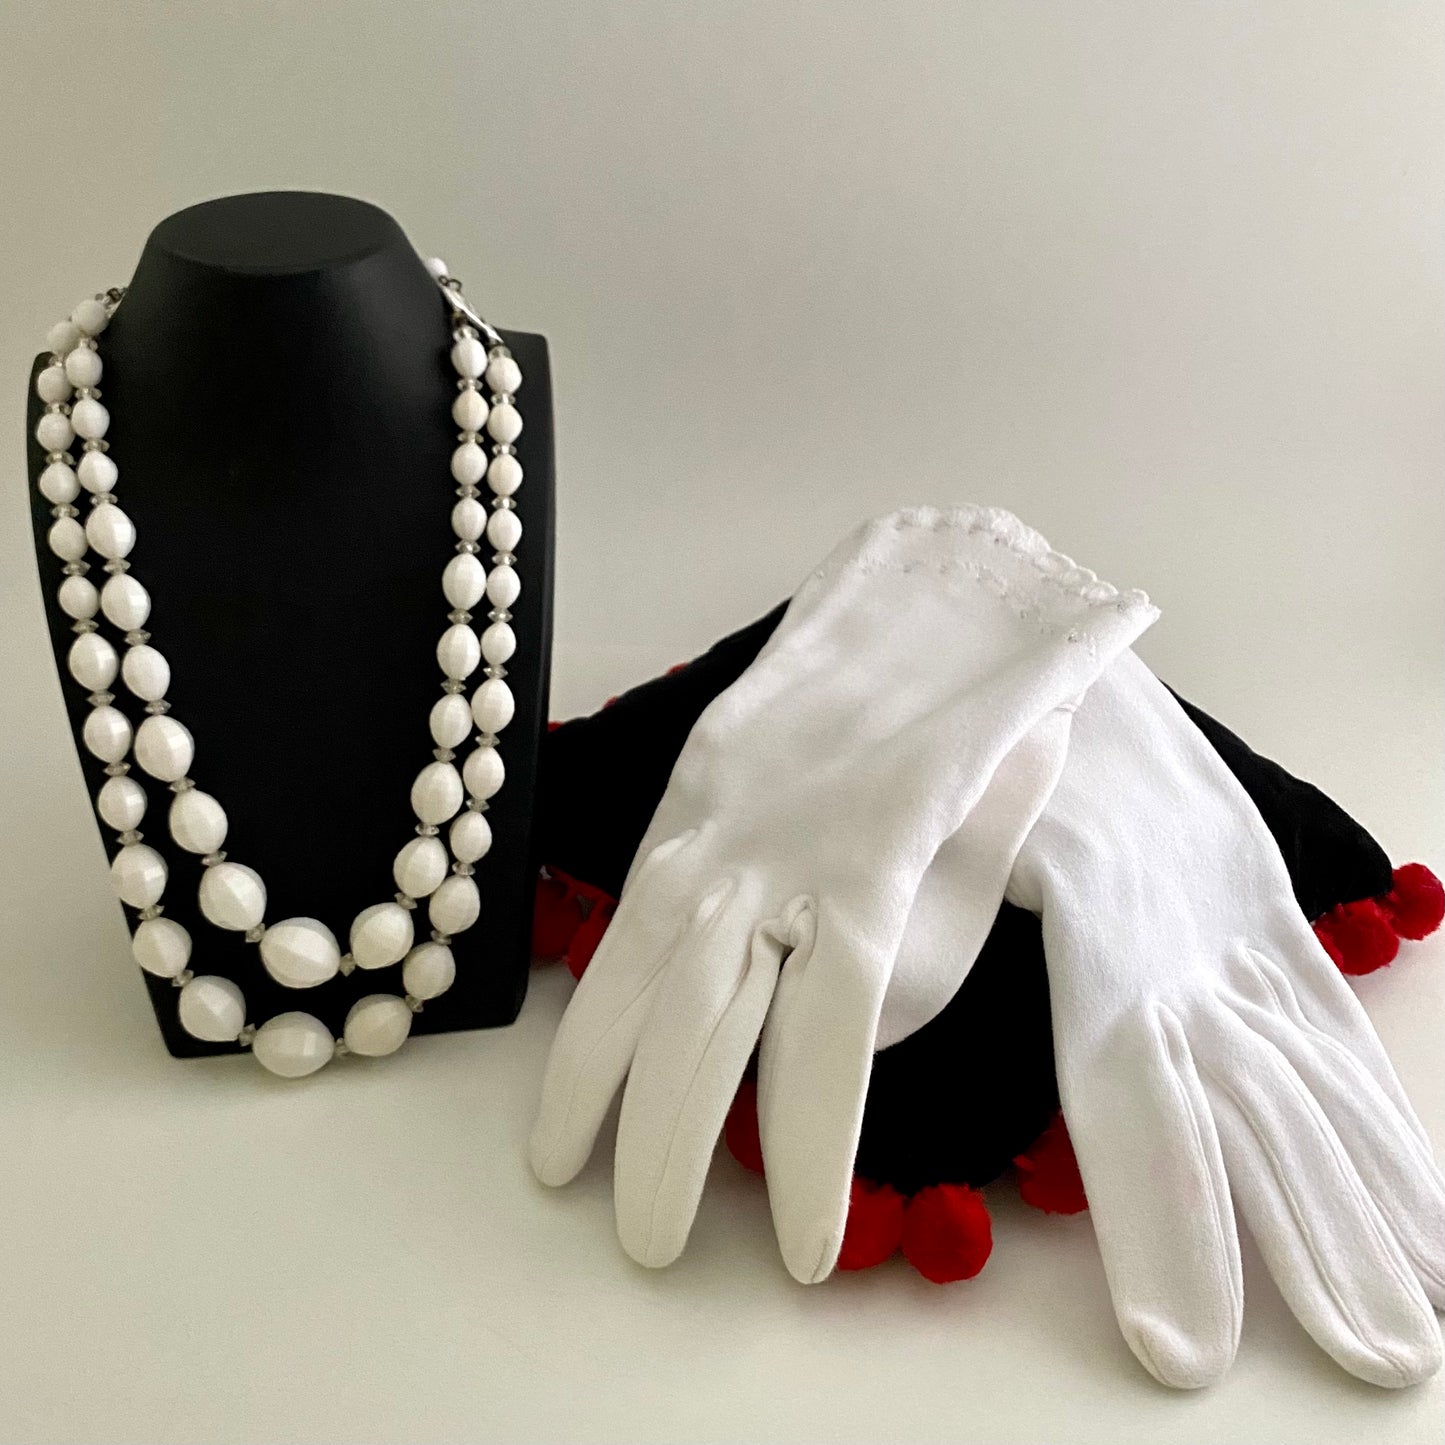 Classic Kandy From Retro Kandy Collection, With Vintage Necklace, Vintage Gloves & Original Artwork